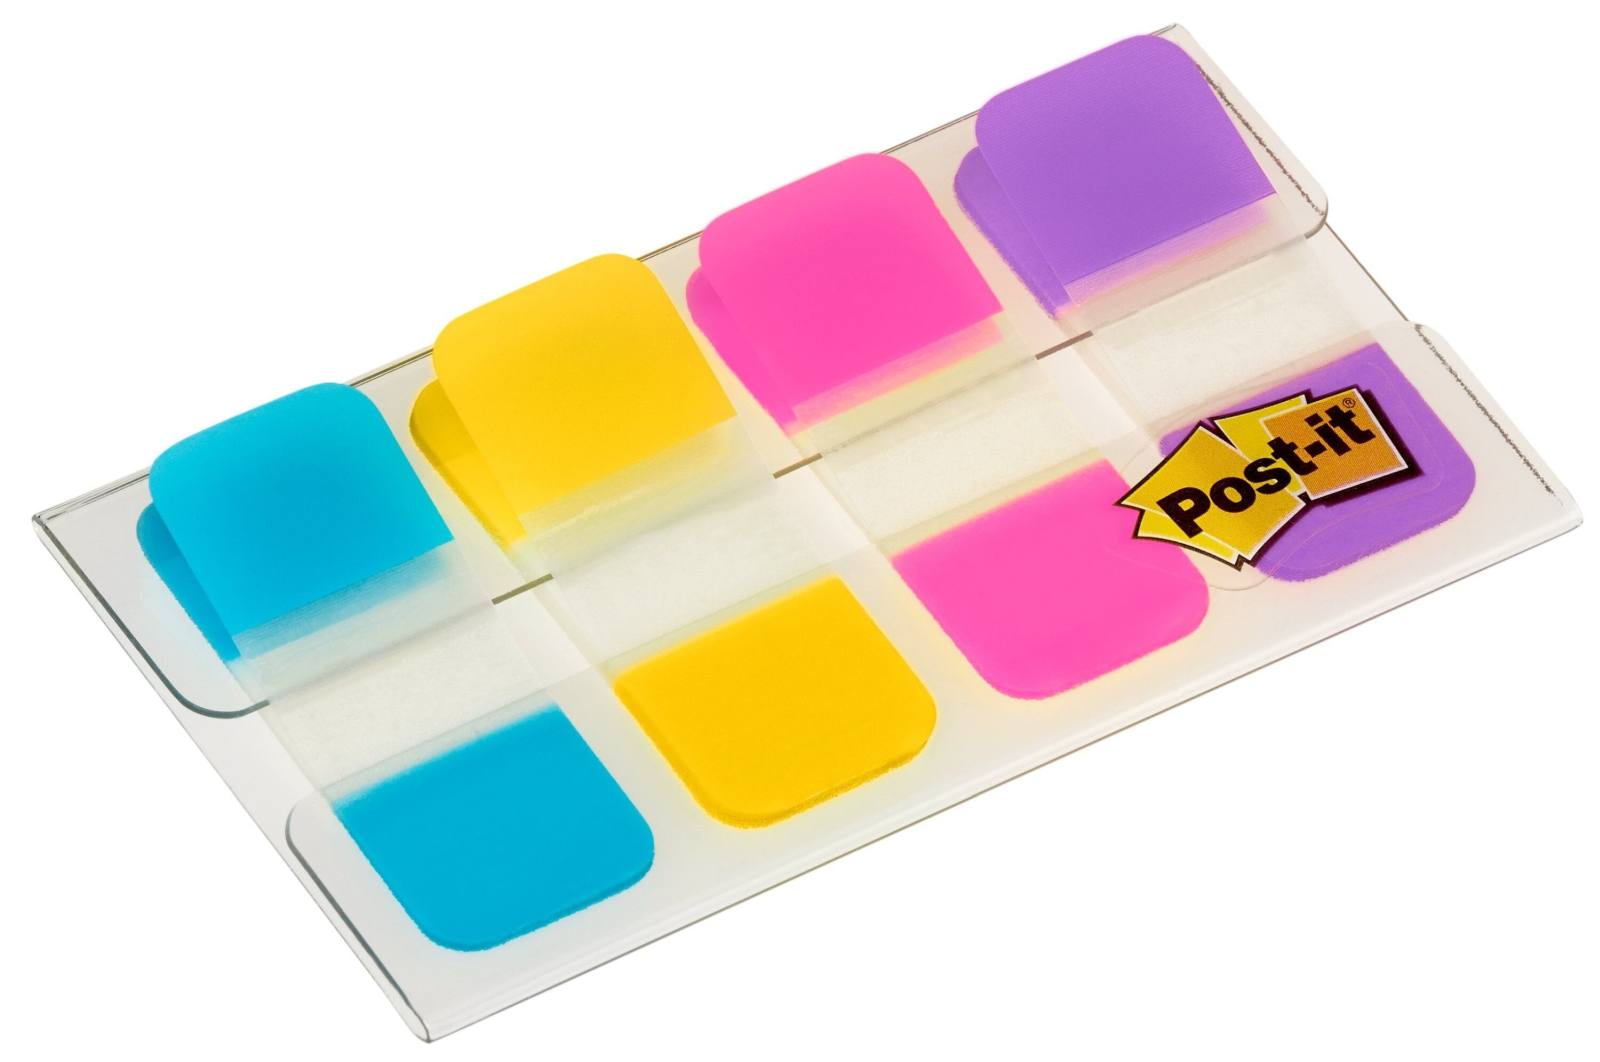 3M Post-it Index Strong 676-AYPV, 4 x 10 adhesive strips in a case, turquoise, yellow, pink, purple, 16 mm x 38 mm